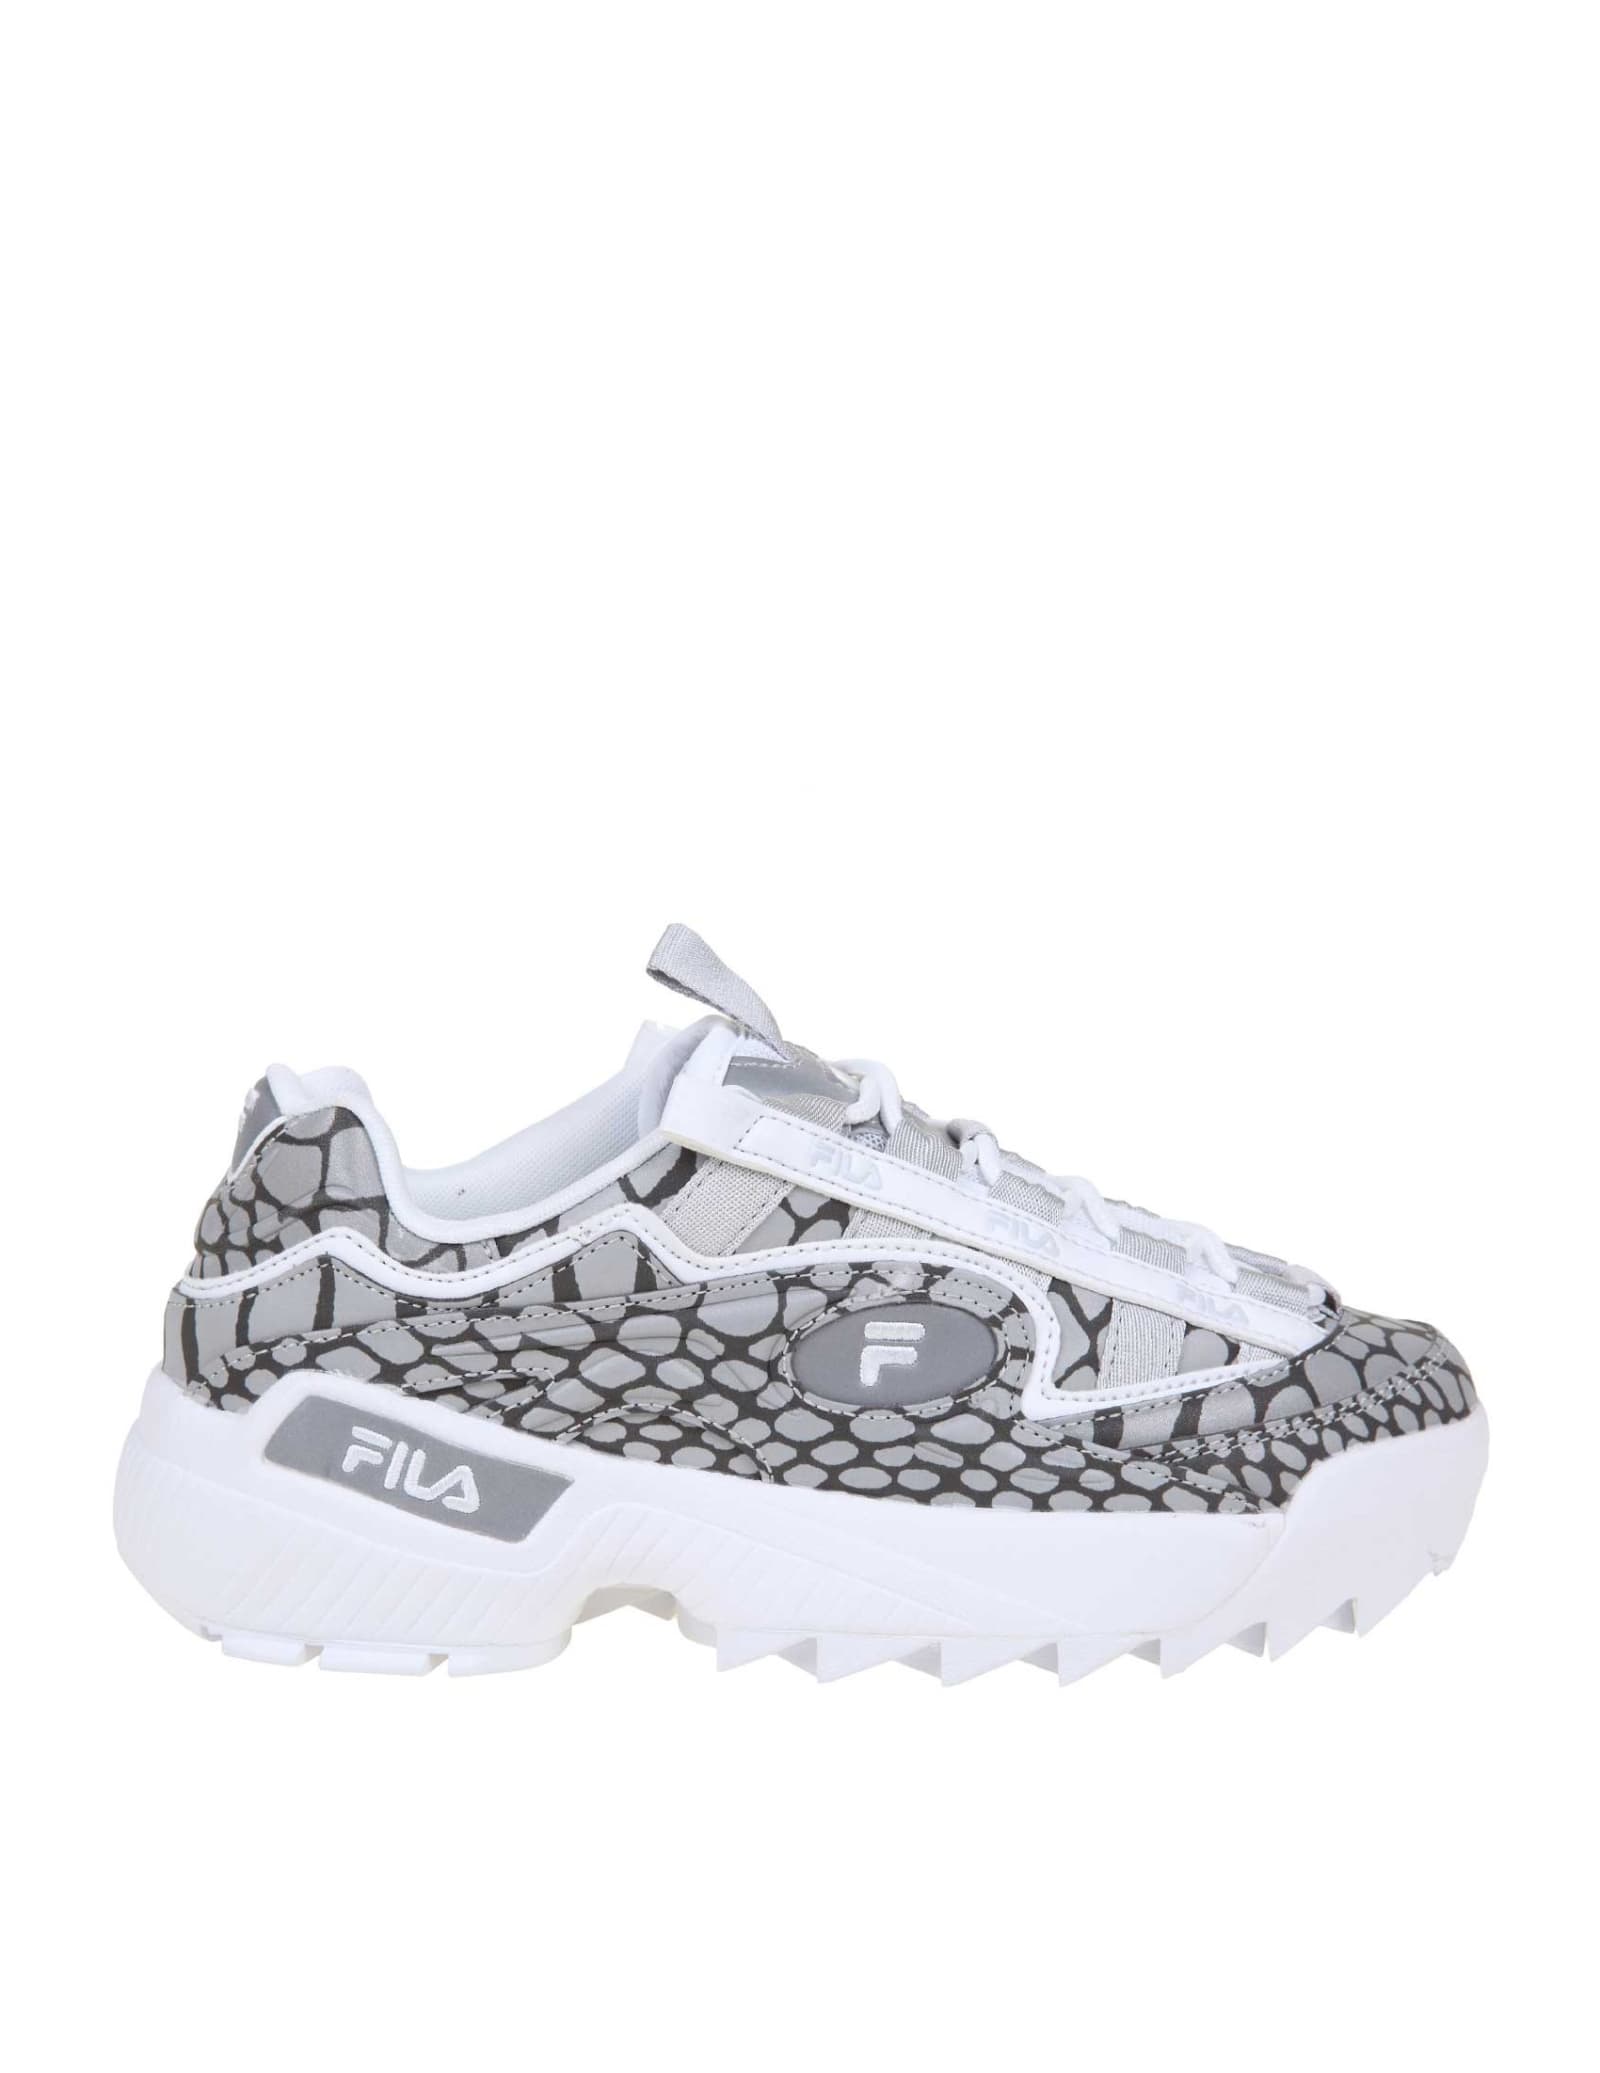 FILA D-FORMATION R WMN LEATHER SNEAKERS,11311248